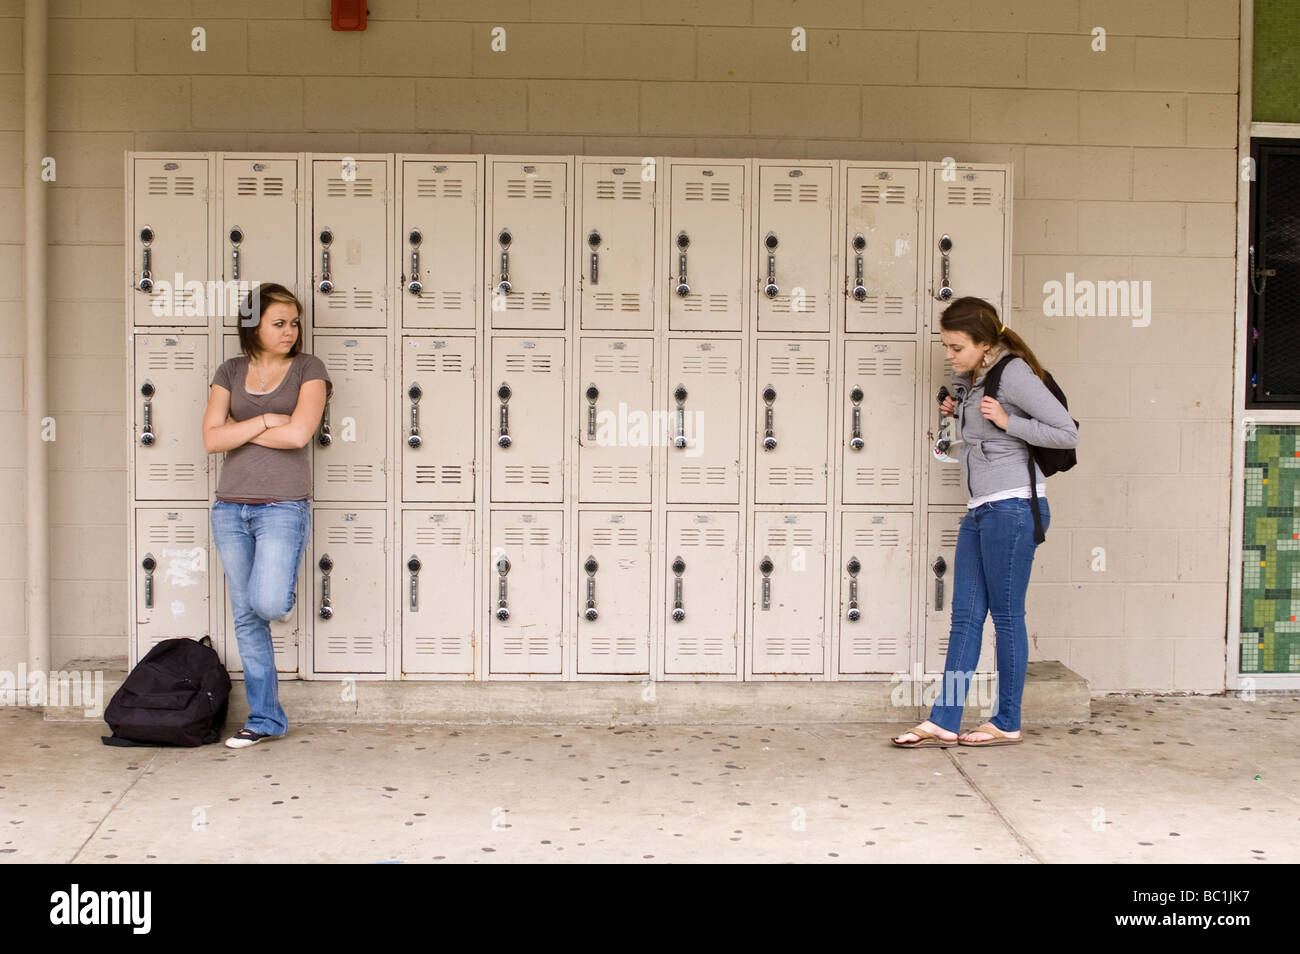 One twin girl angry at her sister in front of their lockers at El Modena High School in Orange, California Stock Photo